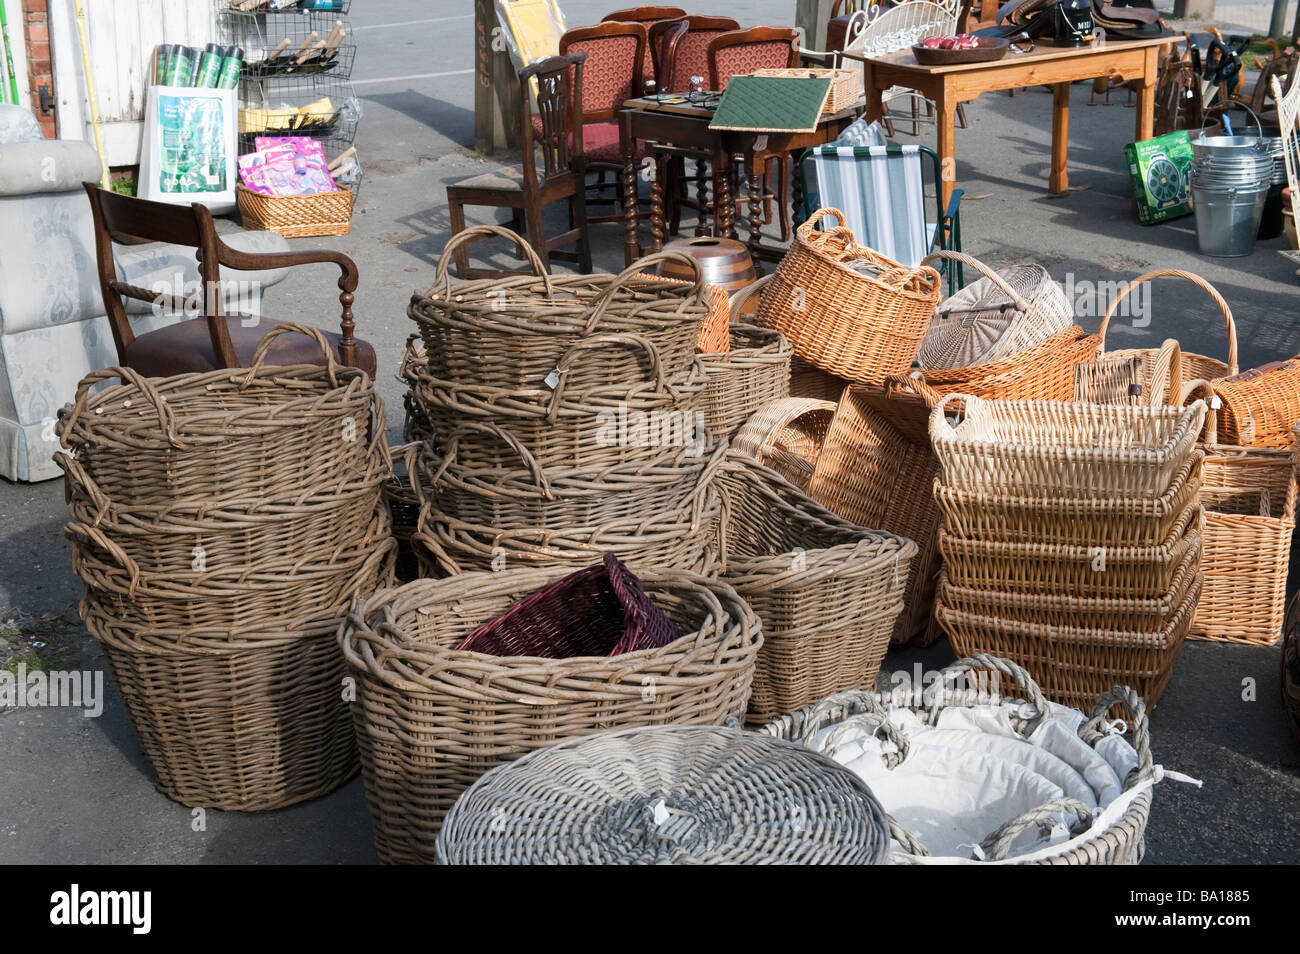 Willow Baskets Stock Photos & Willow Baskets Stock Images - Alamy